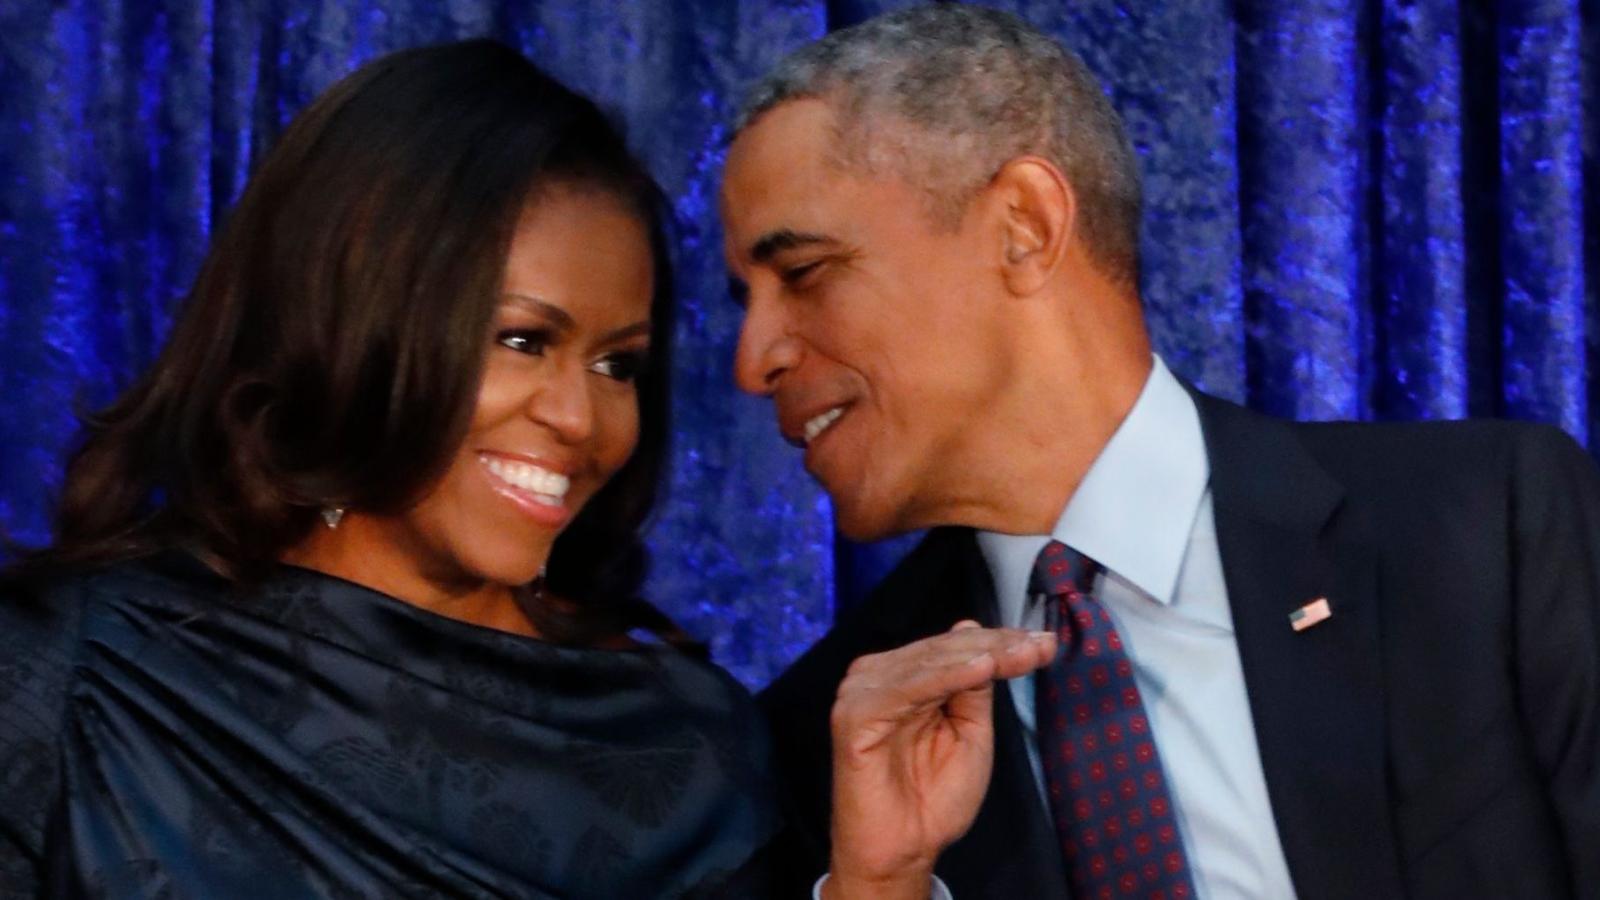 In Becoming, Michelle Obama recalls falling in love at work